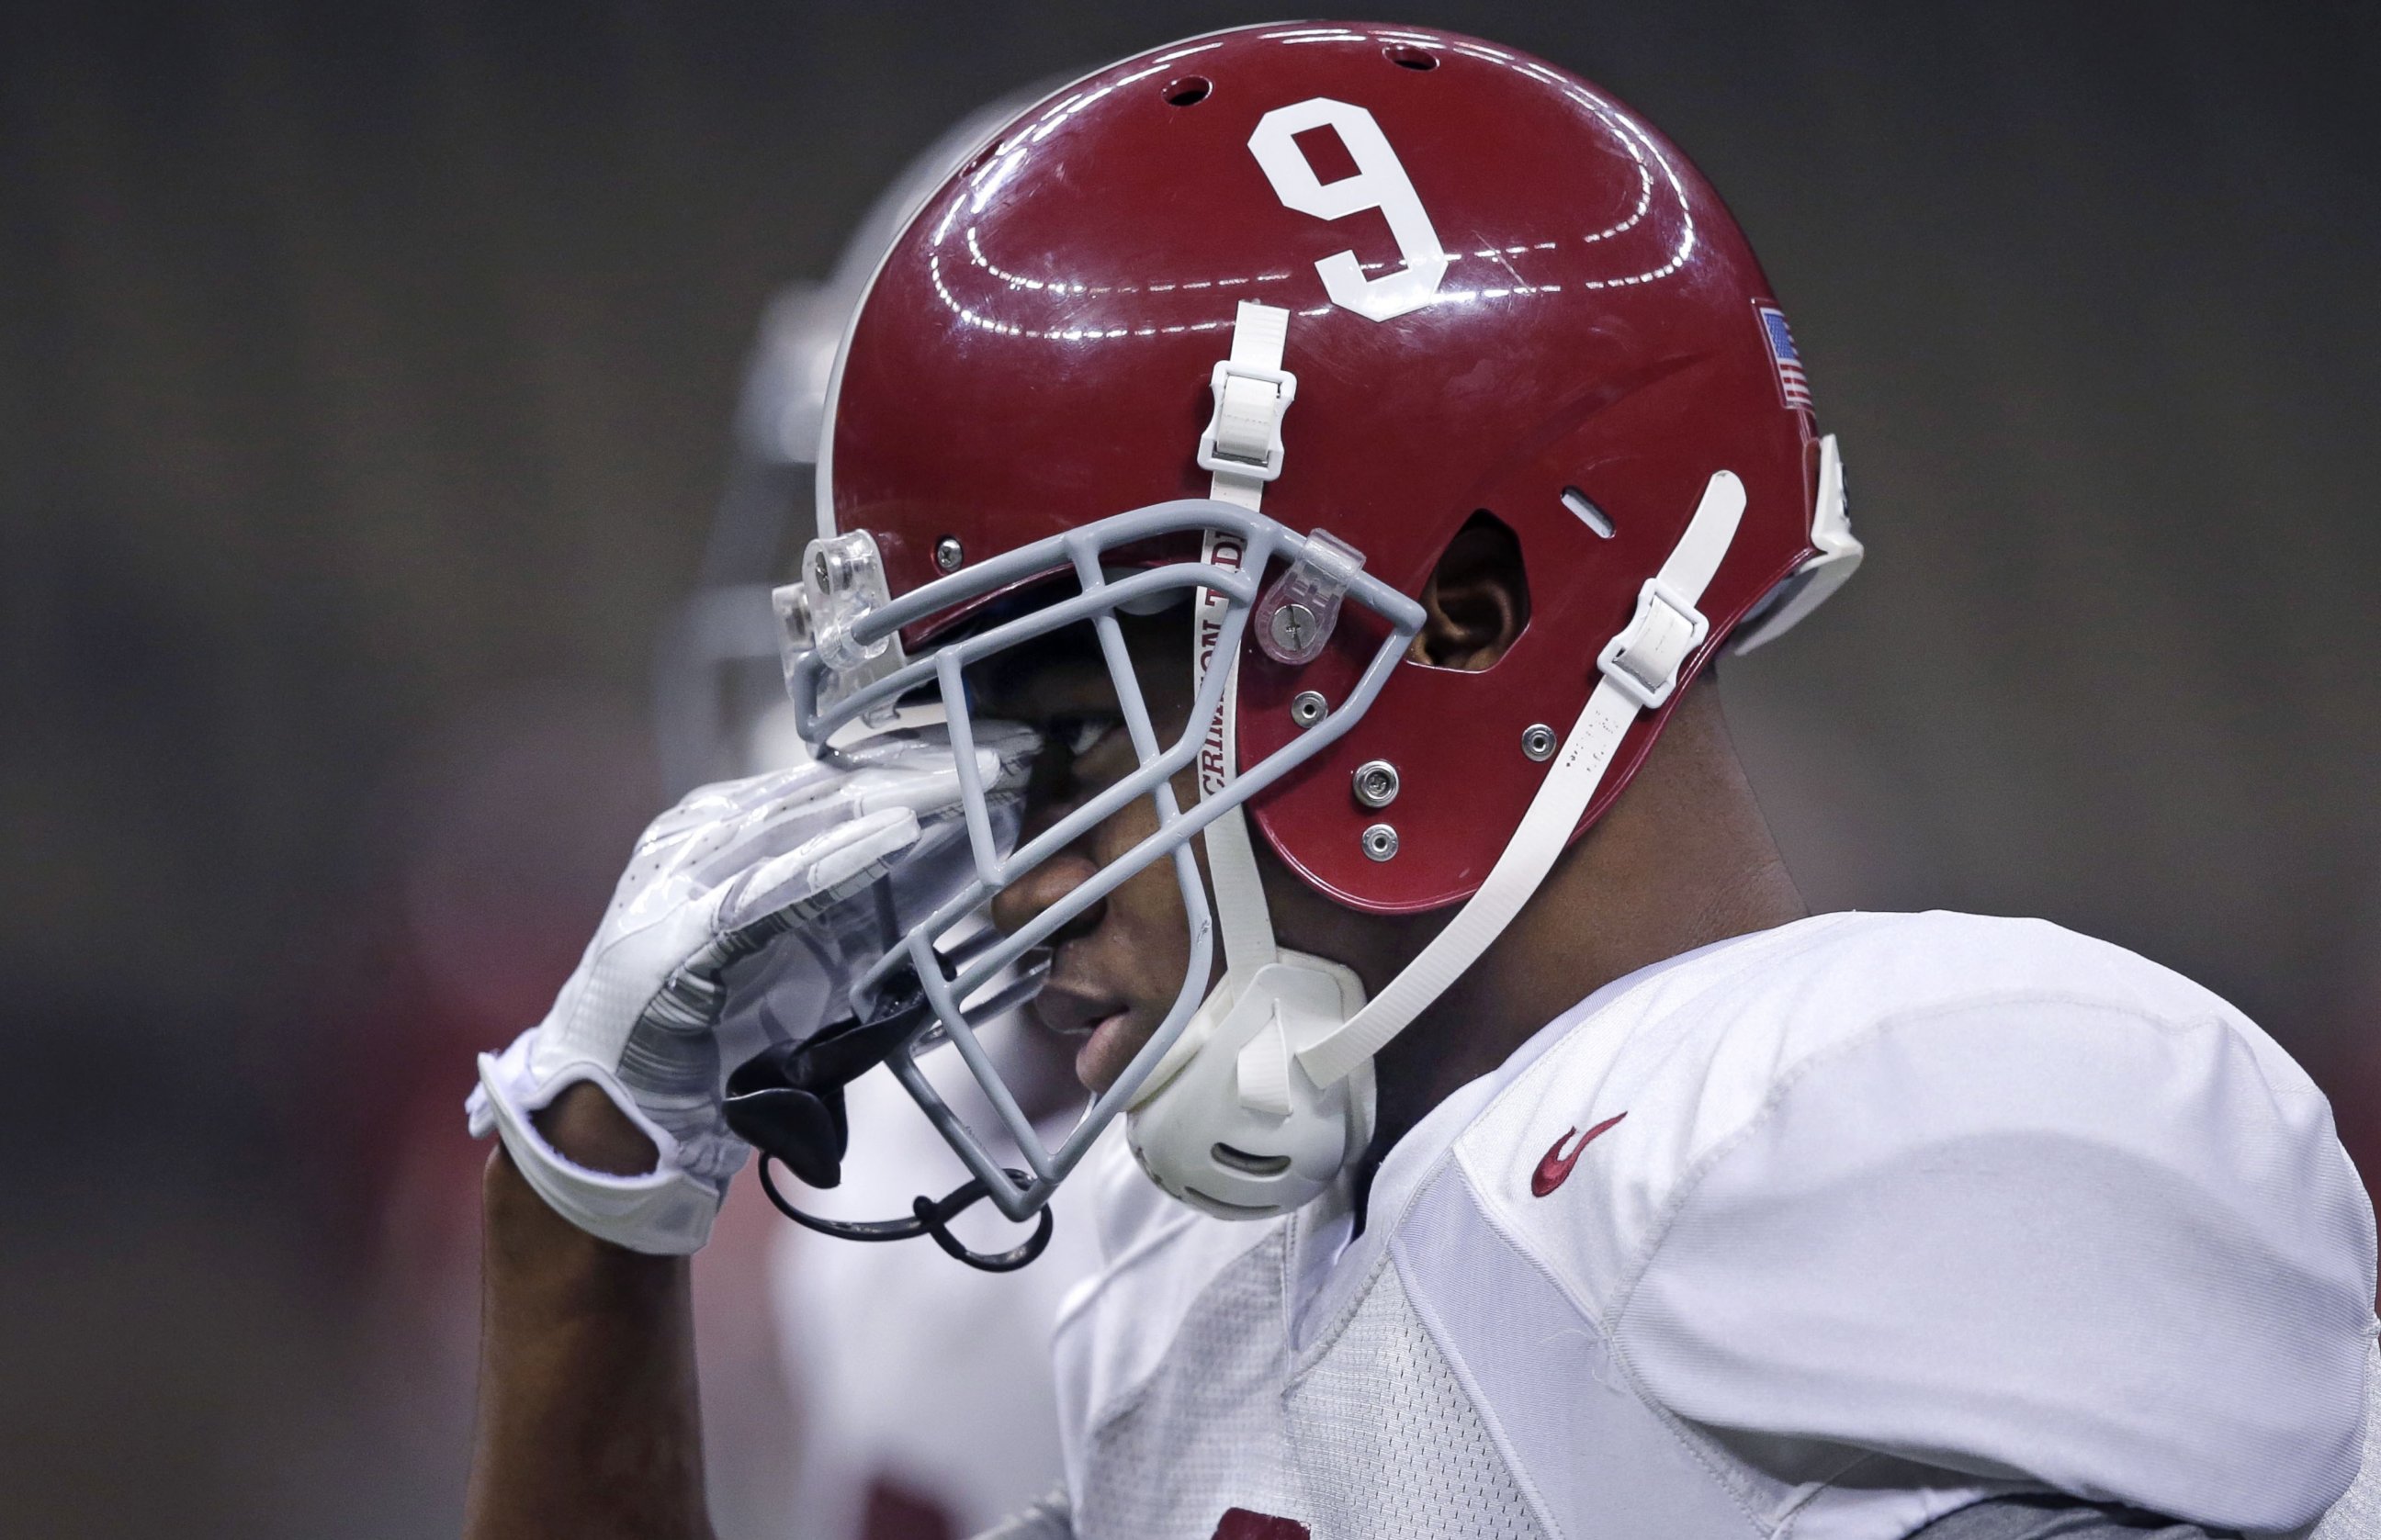 Alabama wide receiver Amari Cooper (9) wipes his brow during practice at the Mercedes-Benz Superdome in New Orleans, Monday, Dec. 29, 2014. They will square off against Ohio State in the Allstate Sugar Bowl NCAA football game on Jan. 1, 2015.